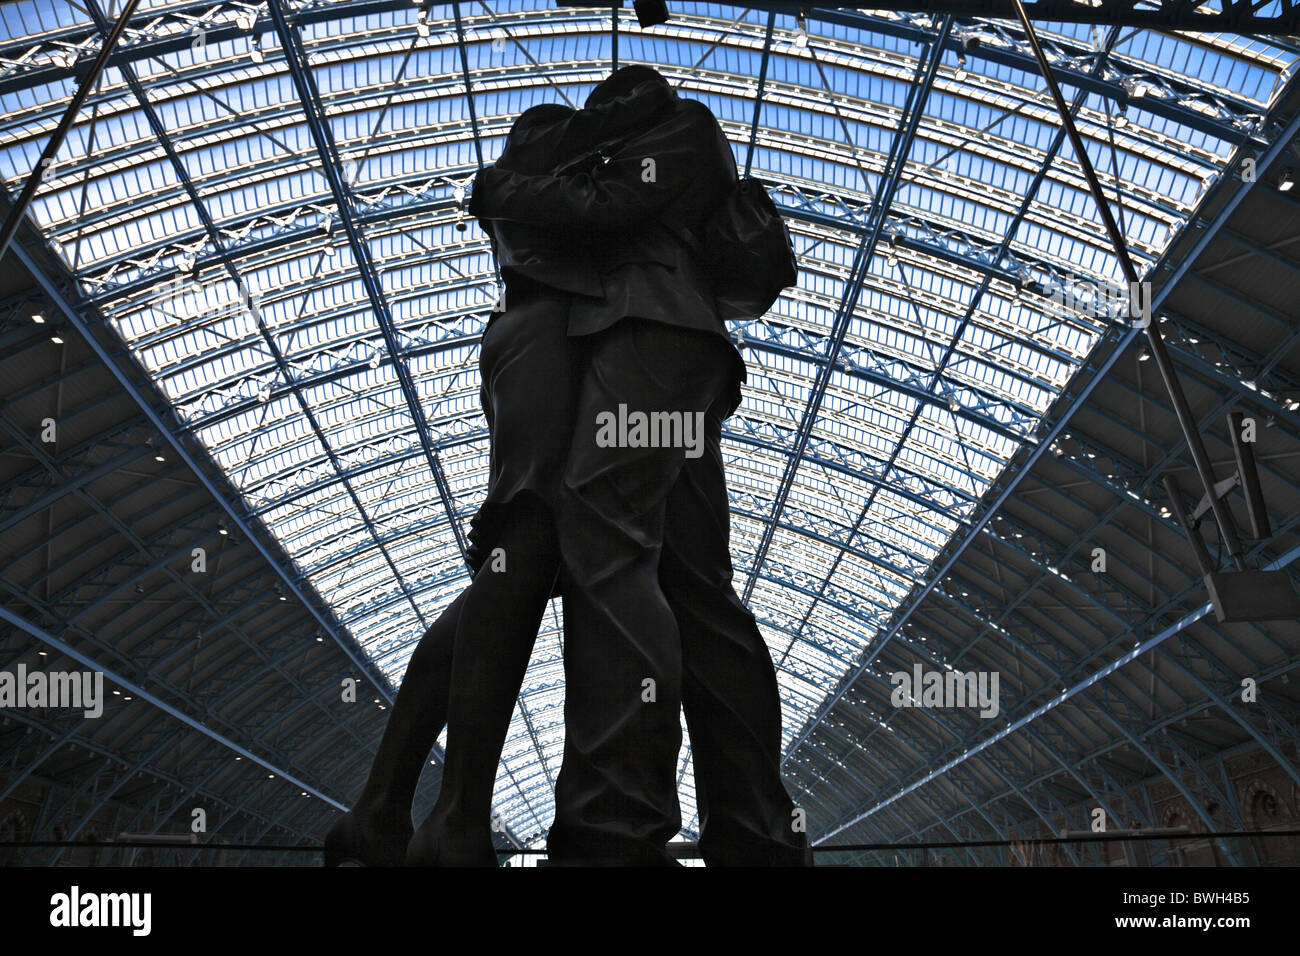 Statue of a kissing couple against the roof of St Pancras international railway station, London Stock Photo